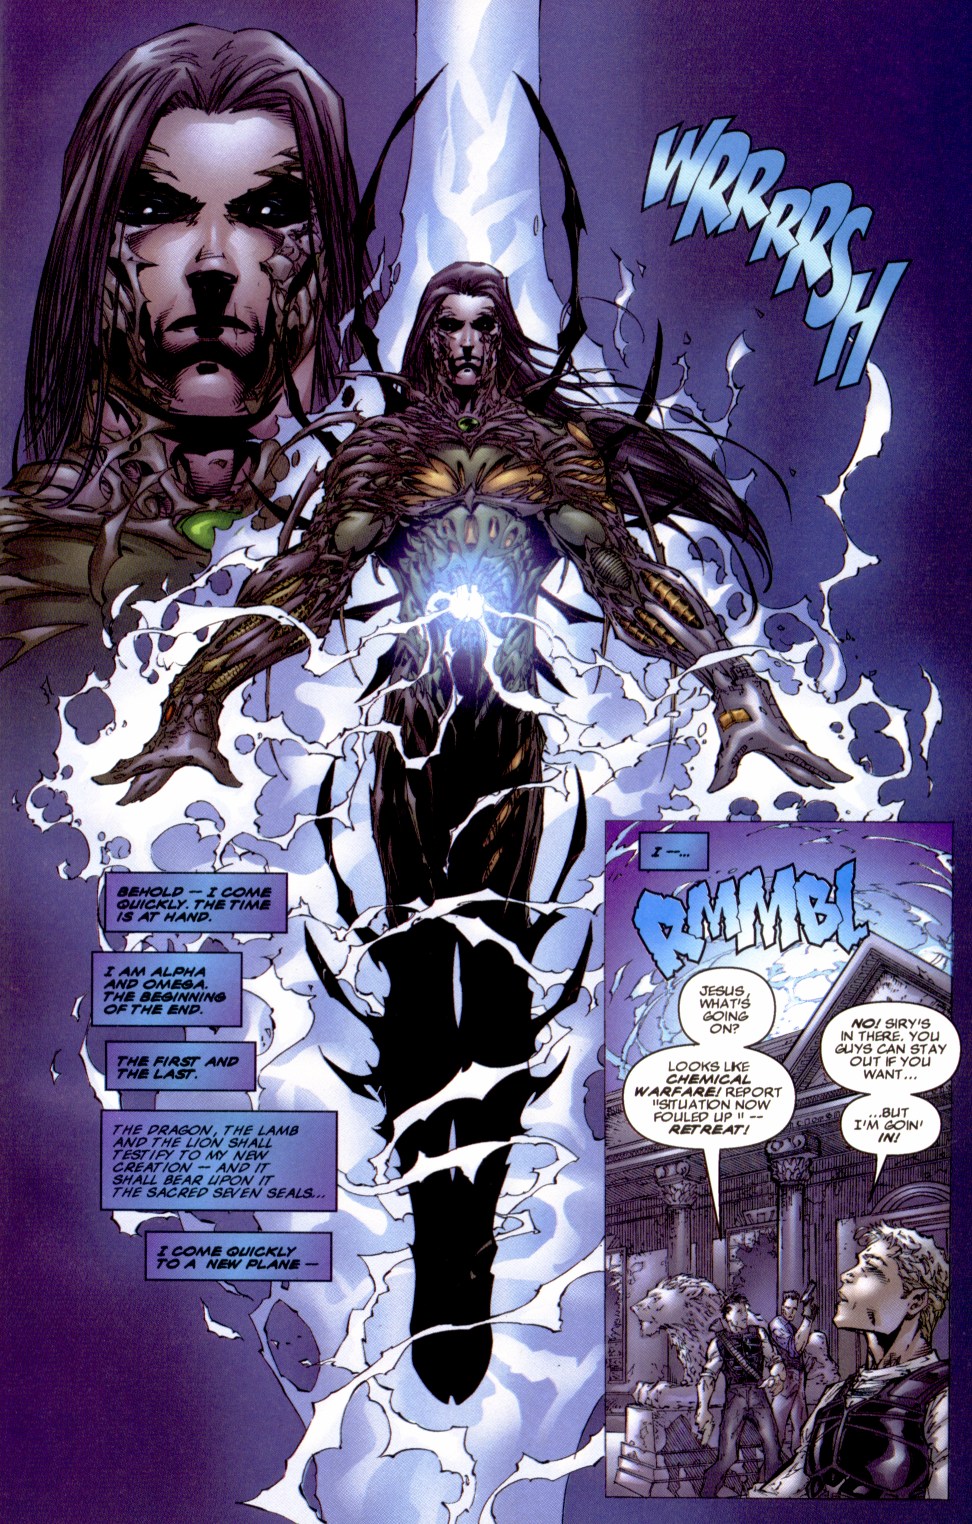 Witchblade #19 - Family Ties, Part 4 - Continued From The Darkness #10